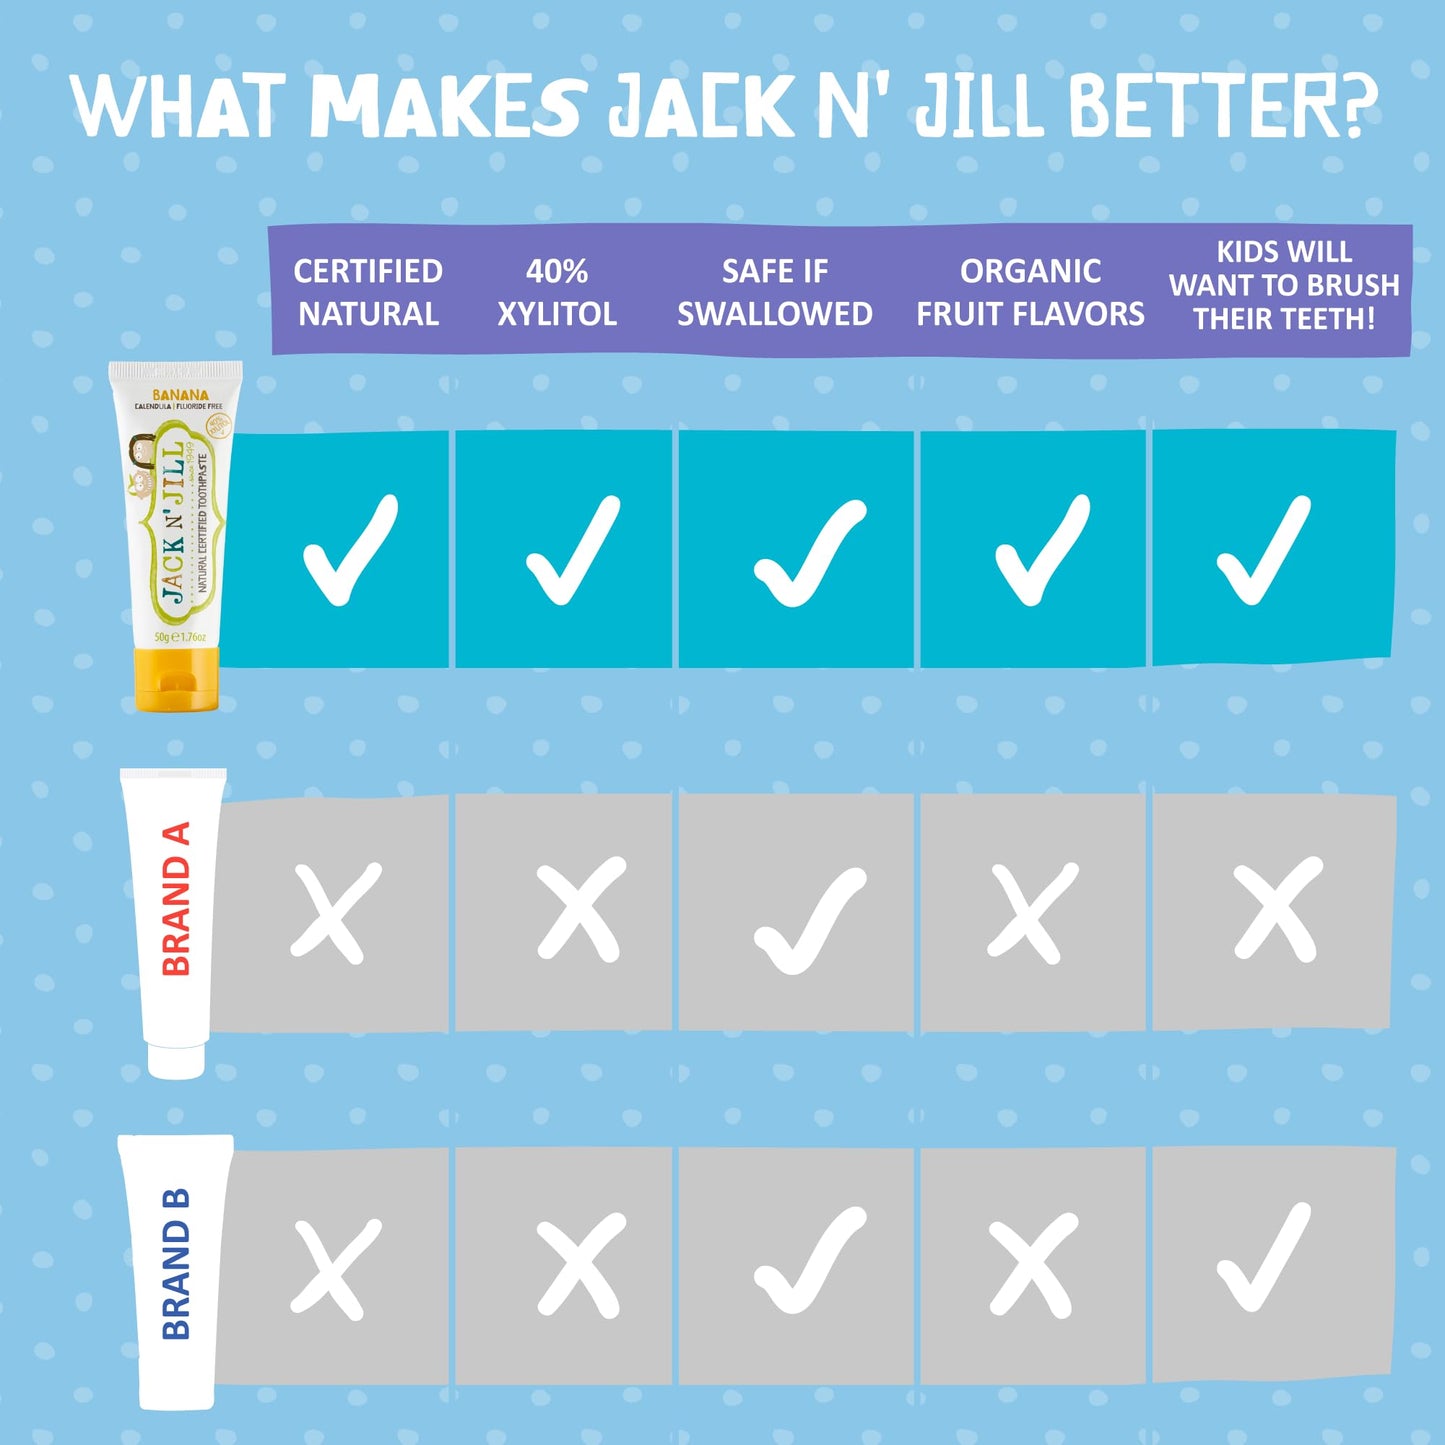 Jack N' Jill Natural Toothpaste for Babies & Toddlers - Safe if Swallowed, Xylitol, Fluoride Free, Organic Fruit Flavor, Makes Tooth Brushing Fun for Kids - Blueberry & Strawberry, 1.76 oz (2 Pack)